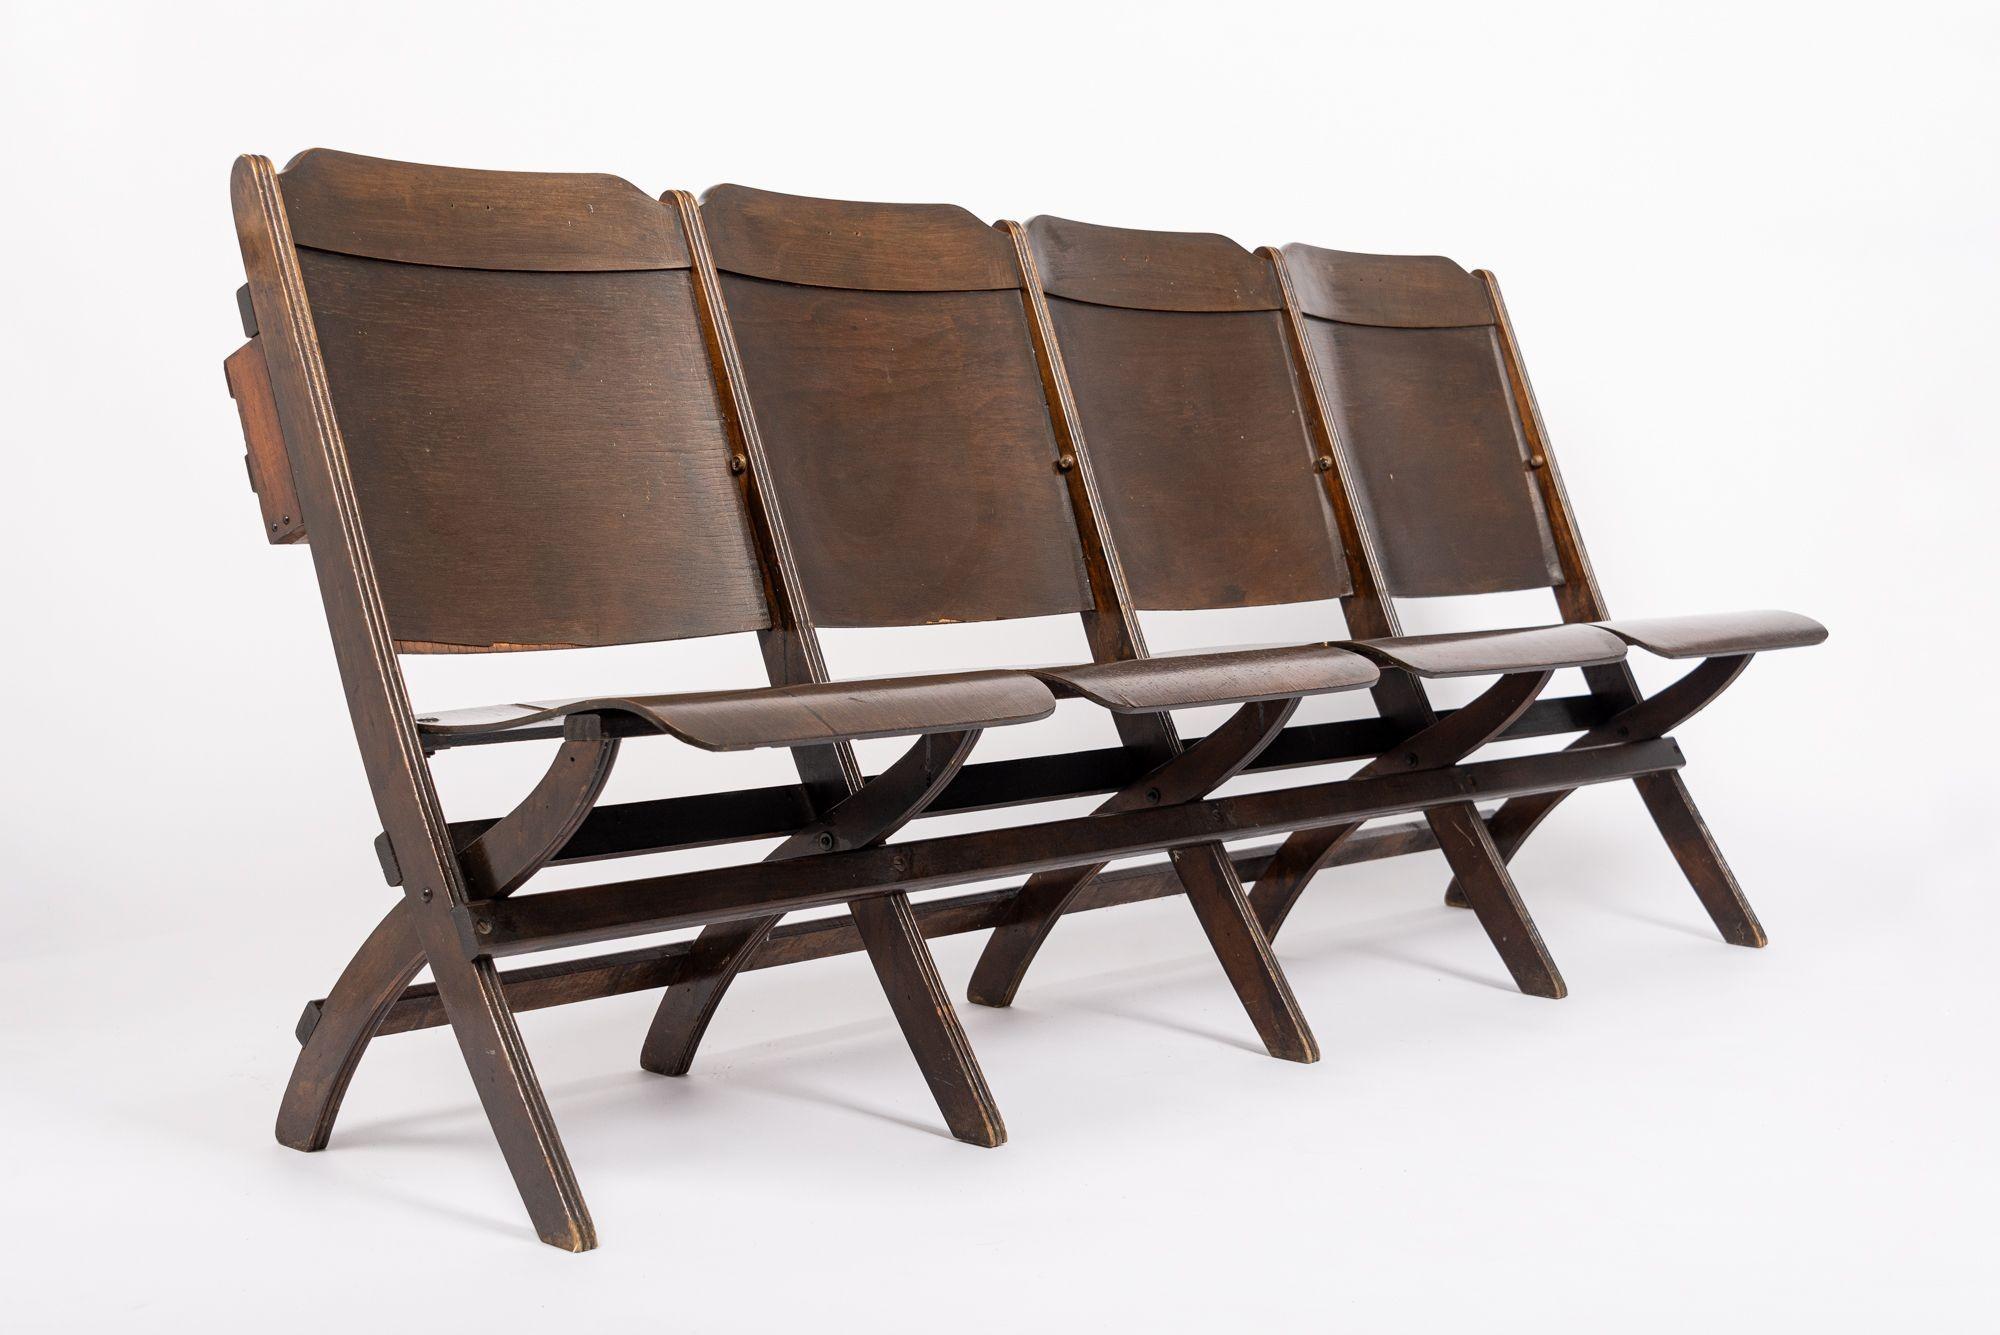 These classic wooden antique folding theater seats are from the General Motors building auditorium in Detroit, MI. This attached four seat set features liftable seats and two wooden book holders on backside. The set also folds up completely for